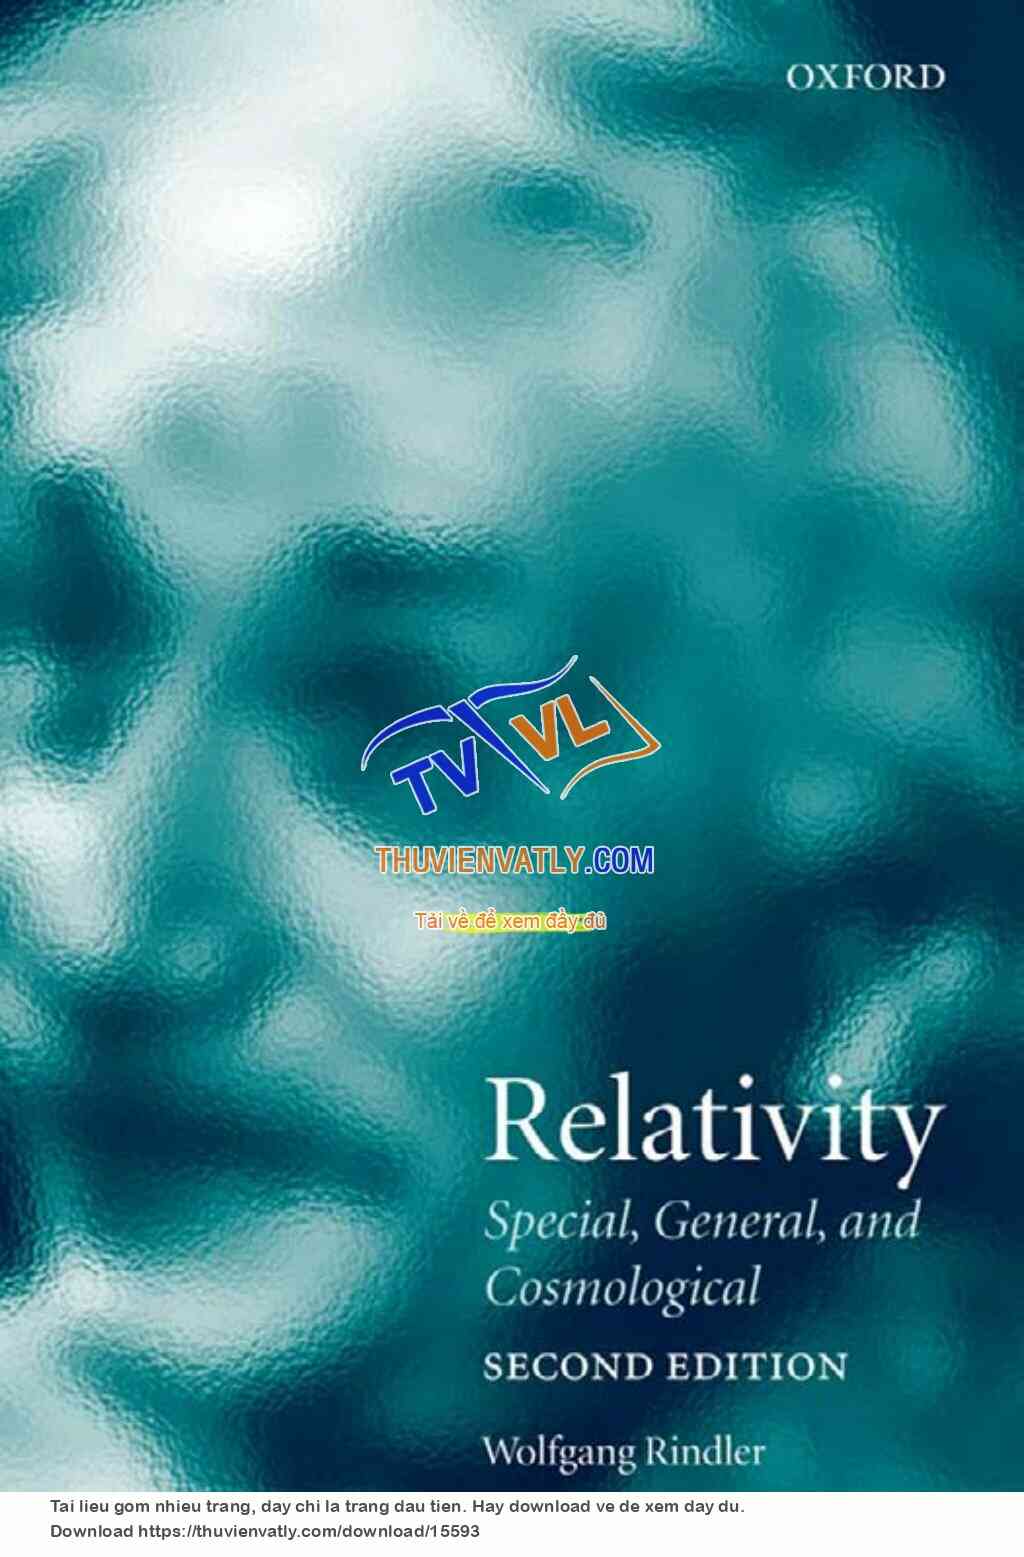 Relativity - Special,General and Cosmological 2nd Ed. (Wolfgang Rindler, Oxford 2006)